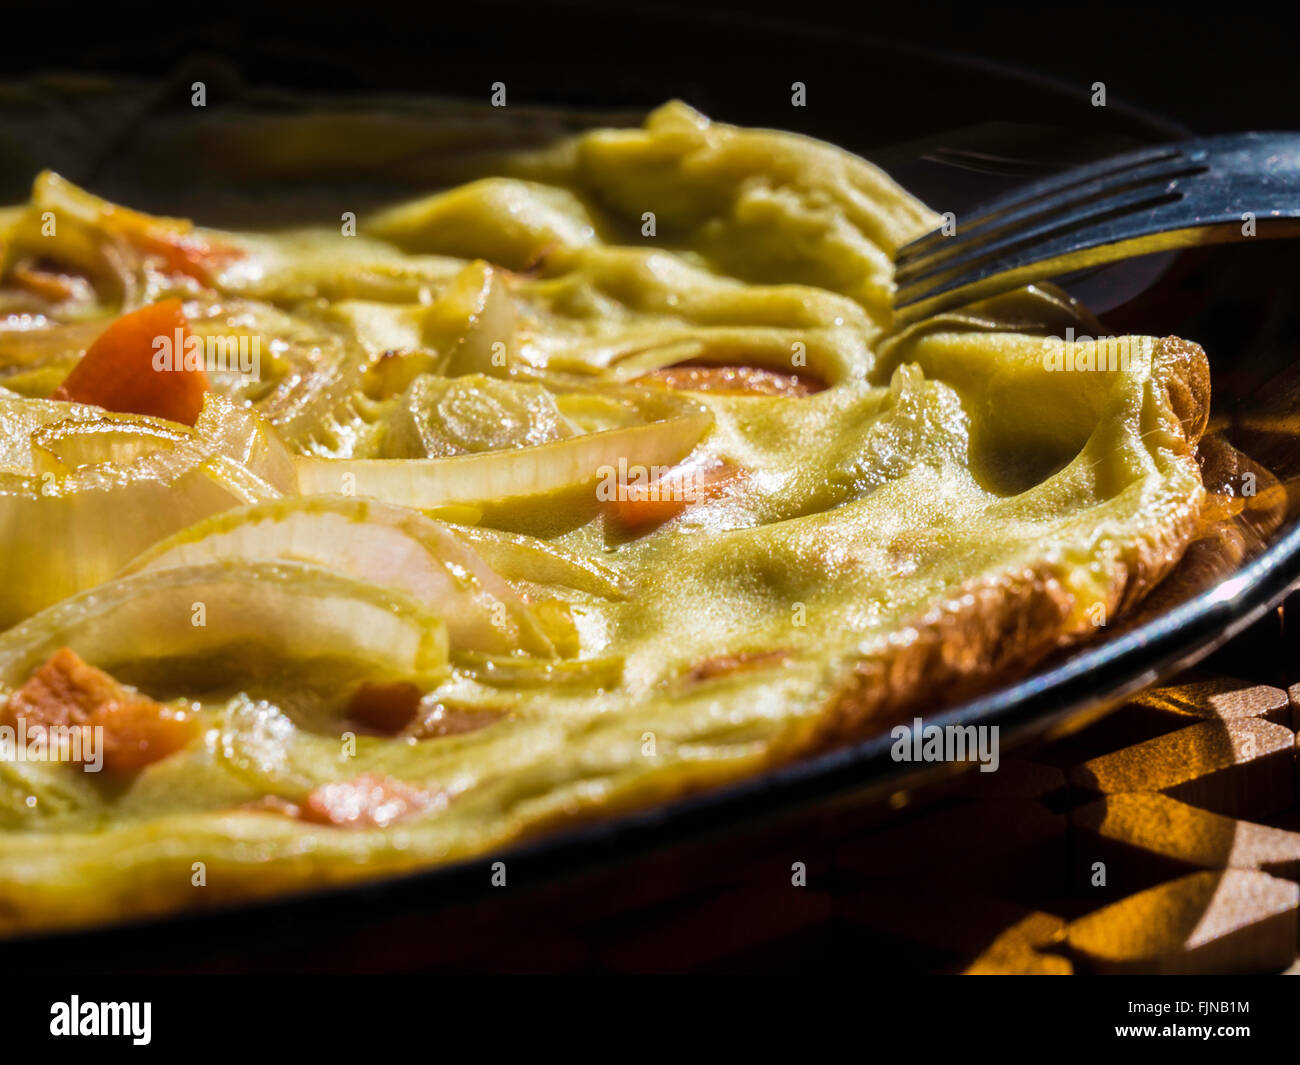 Close-Up Of Cooked Dish With Onion Ready To Eat Stock Photo